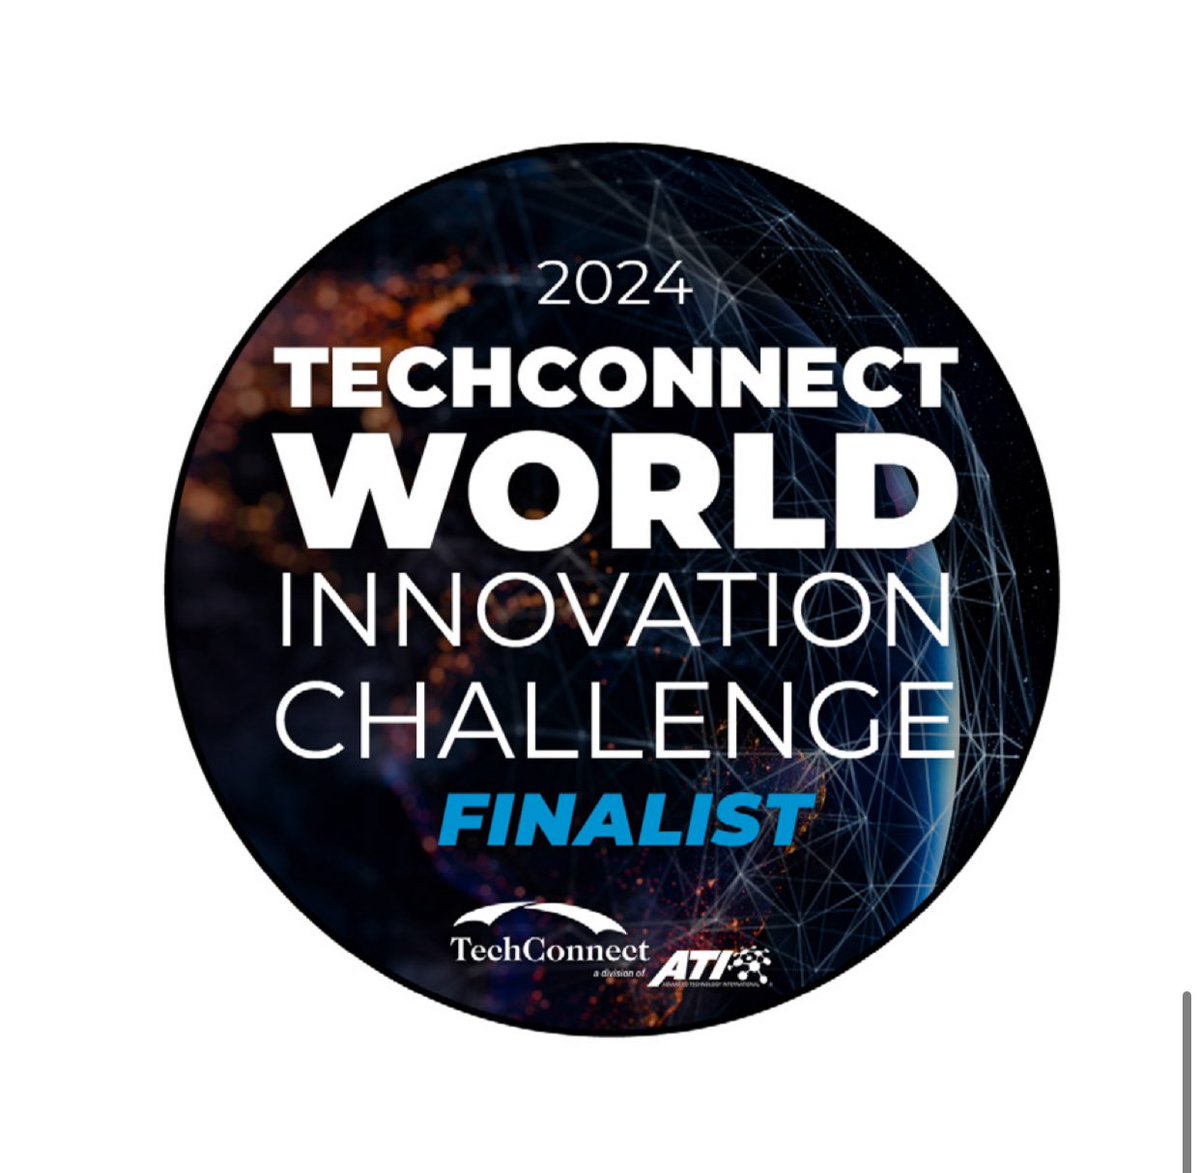 Thrilled to announce that Better Bleeding Control was selected as a finalist in the @TechConnect360 Innovation Challenge in Washington DC next month. I’ll be presenting to a room of experts, investors, technology scouts, & military officials. So excited! (& a little nervous 😉)